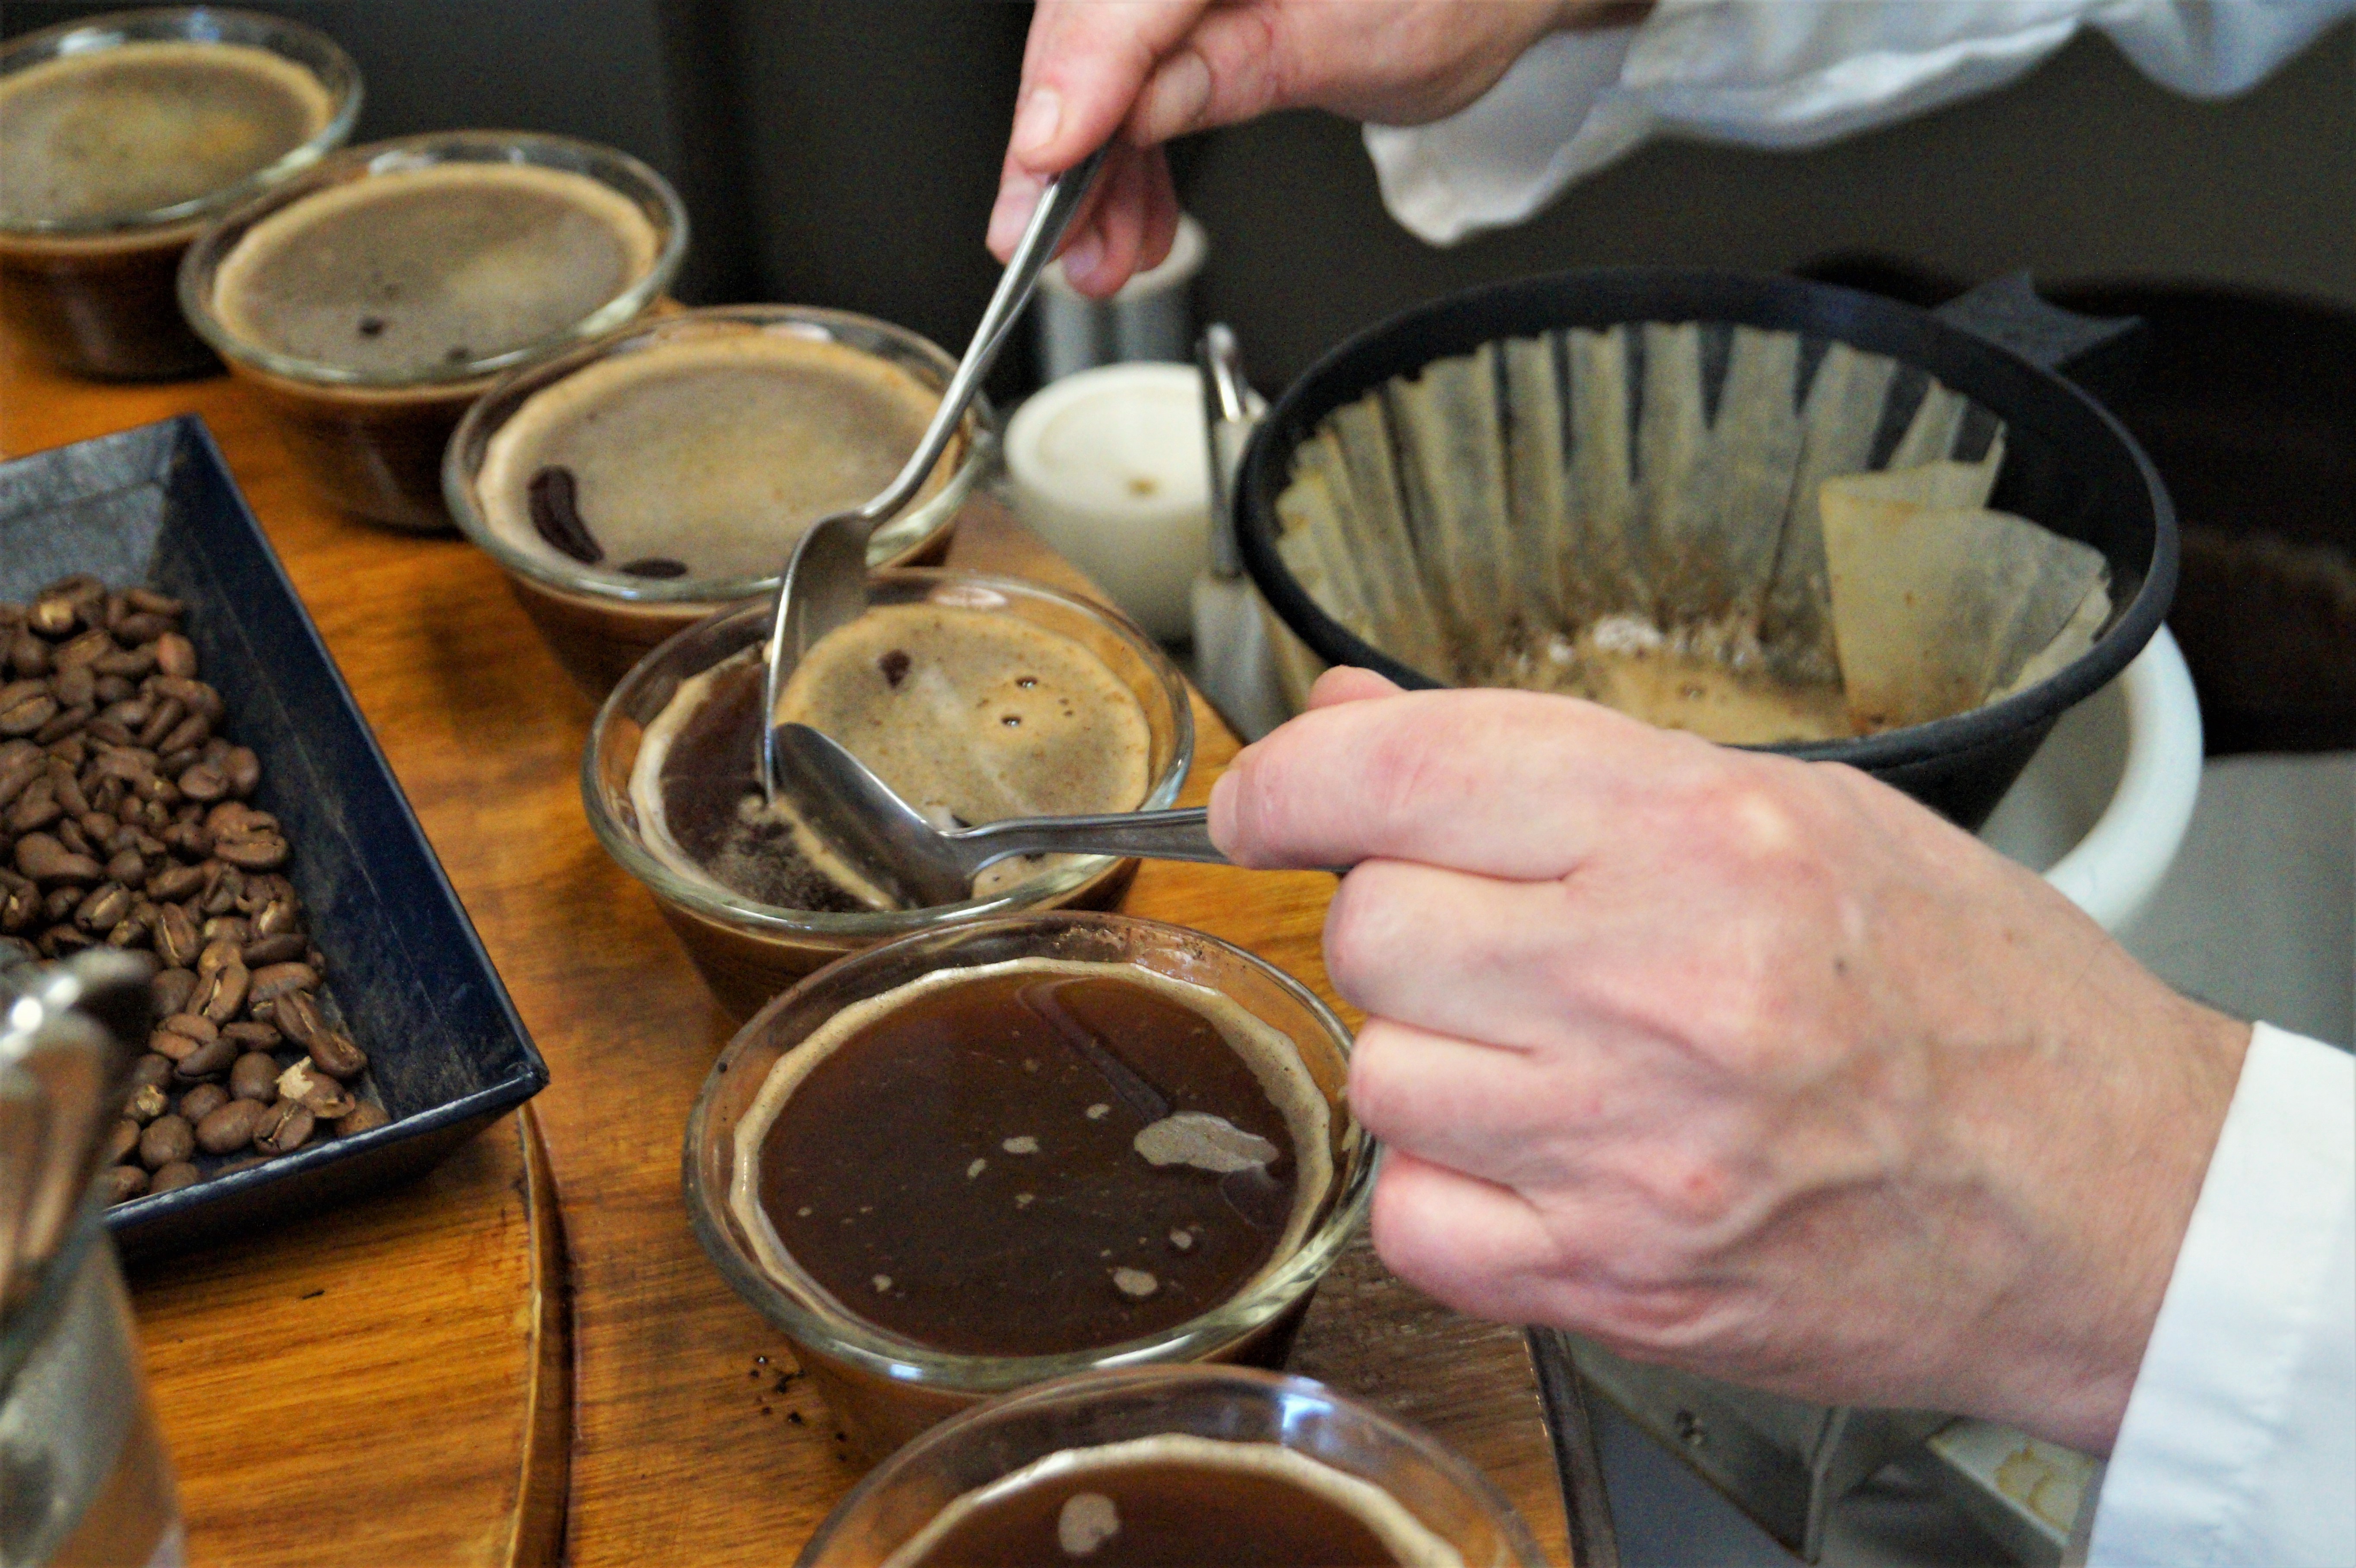 The creme of the coffee is removed after the crust has been broken and before tasting occurs at Paul deLima.